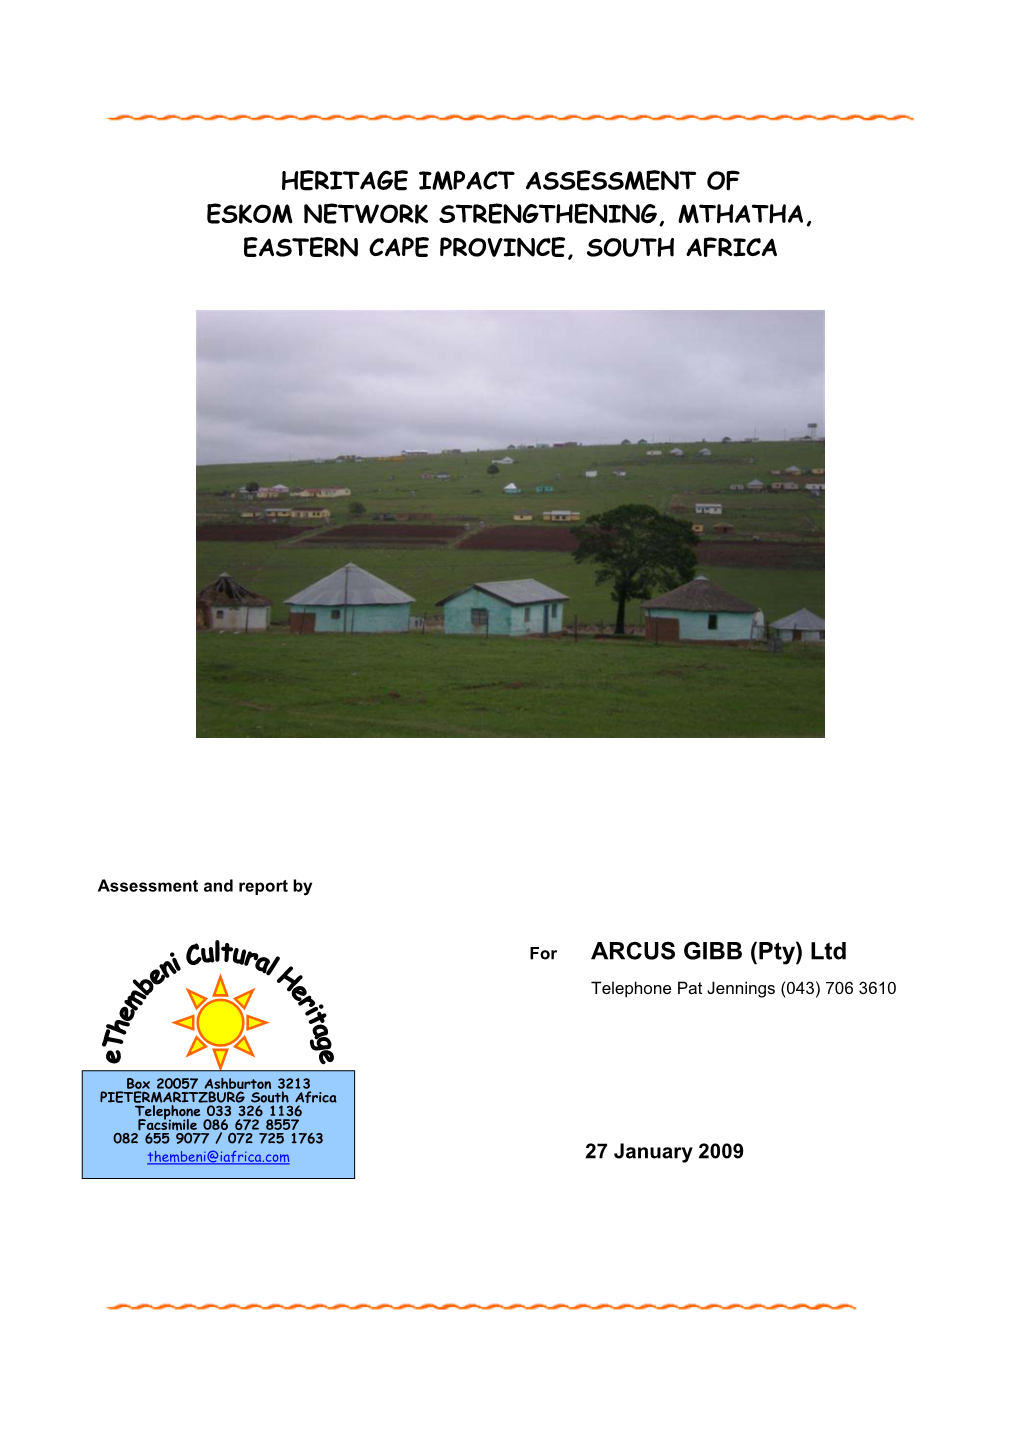 Heritage Impact Assessment of Eskom Network Strengthening, Mthatha, Eastern Cape Province, South Africa